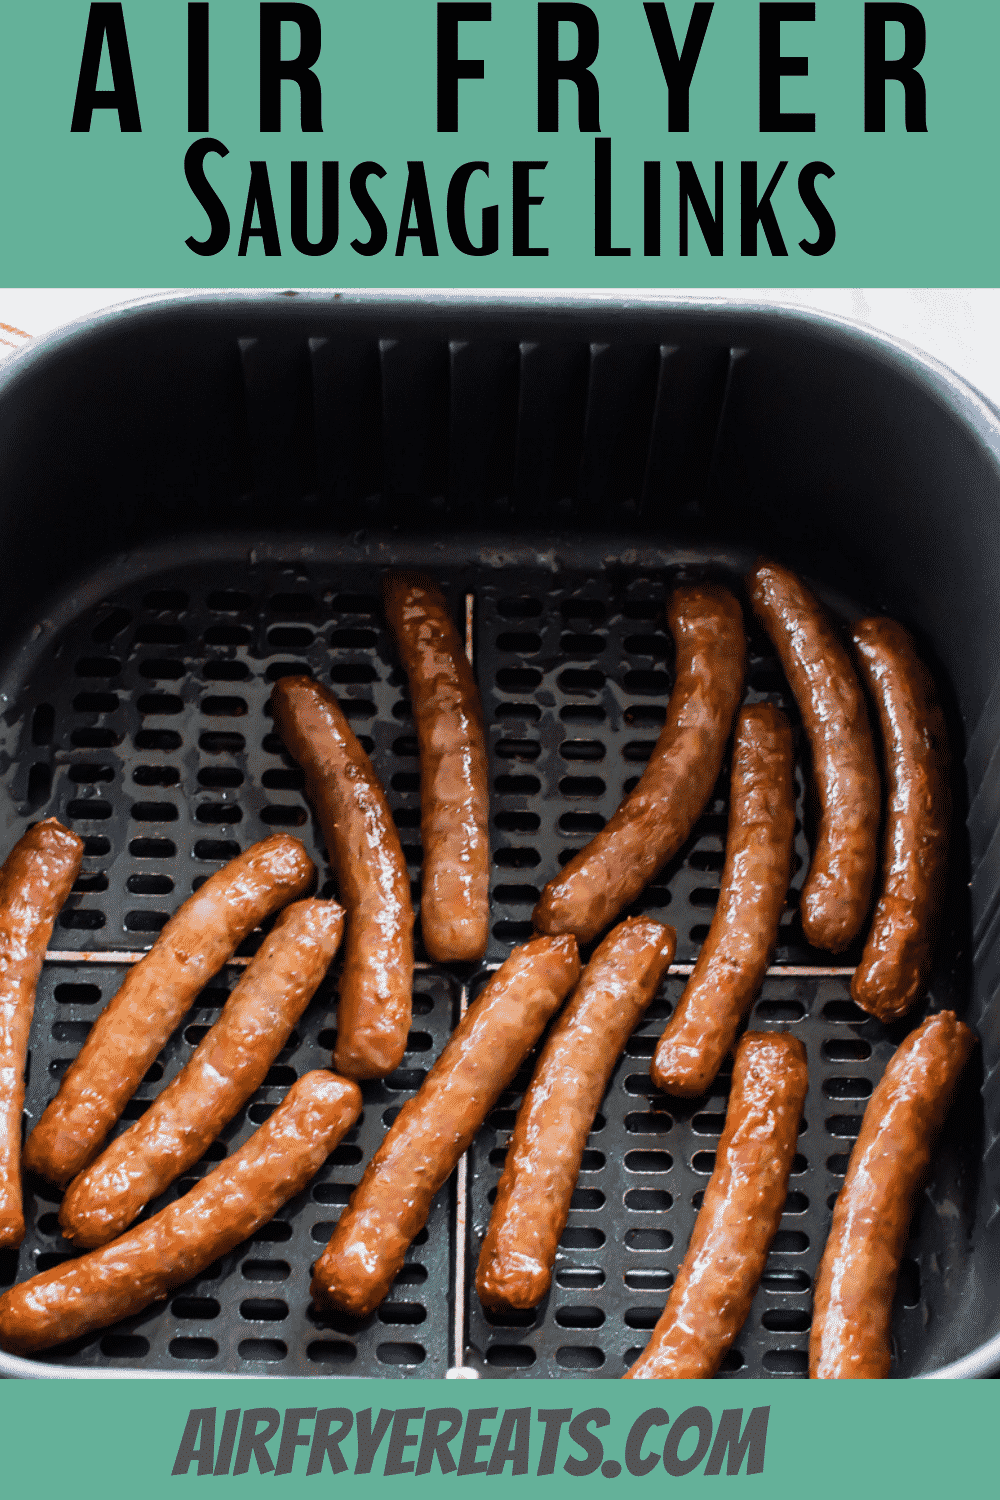 Salty and sweet, browned and slightly crispy, air fryer sausage links will be a favorite addition to your breakfast table. Fresh breakfast sausages are ready in less than 10 minutes. #sausage #airfryer #breakfast via @vegetarianmamma